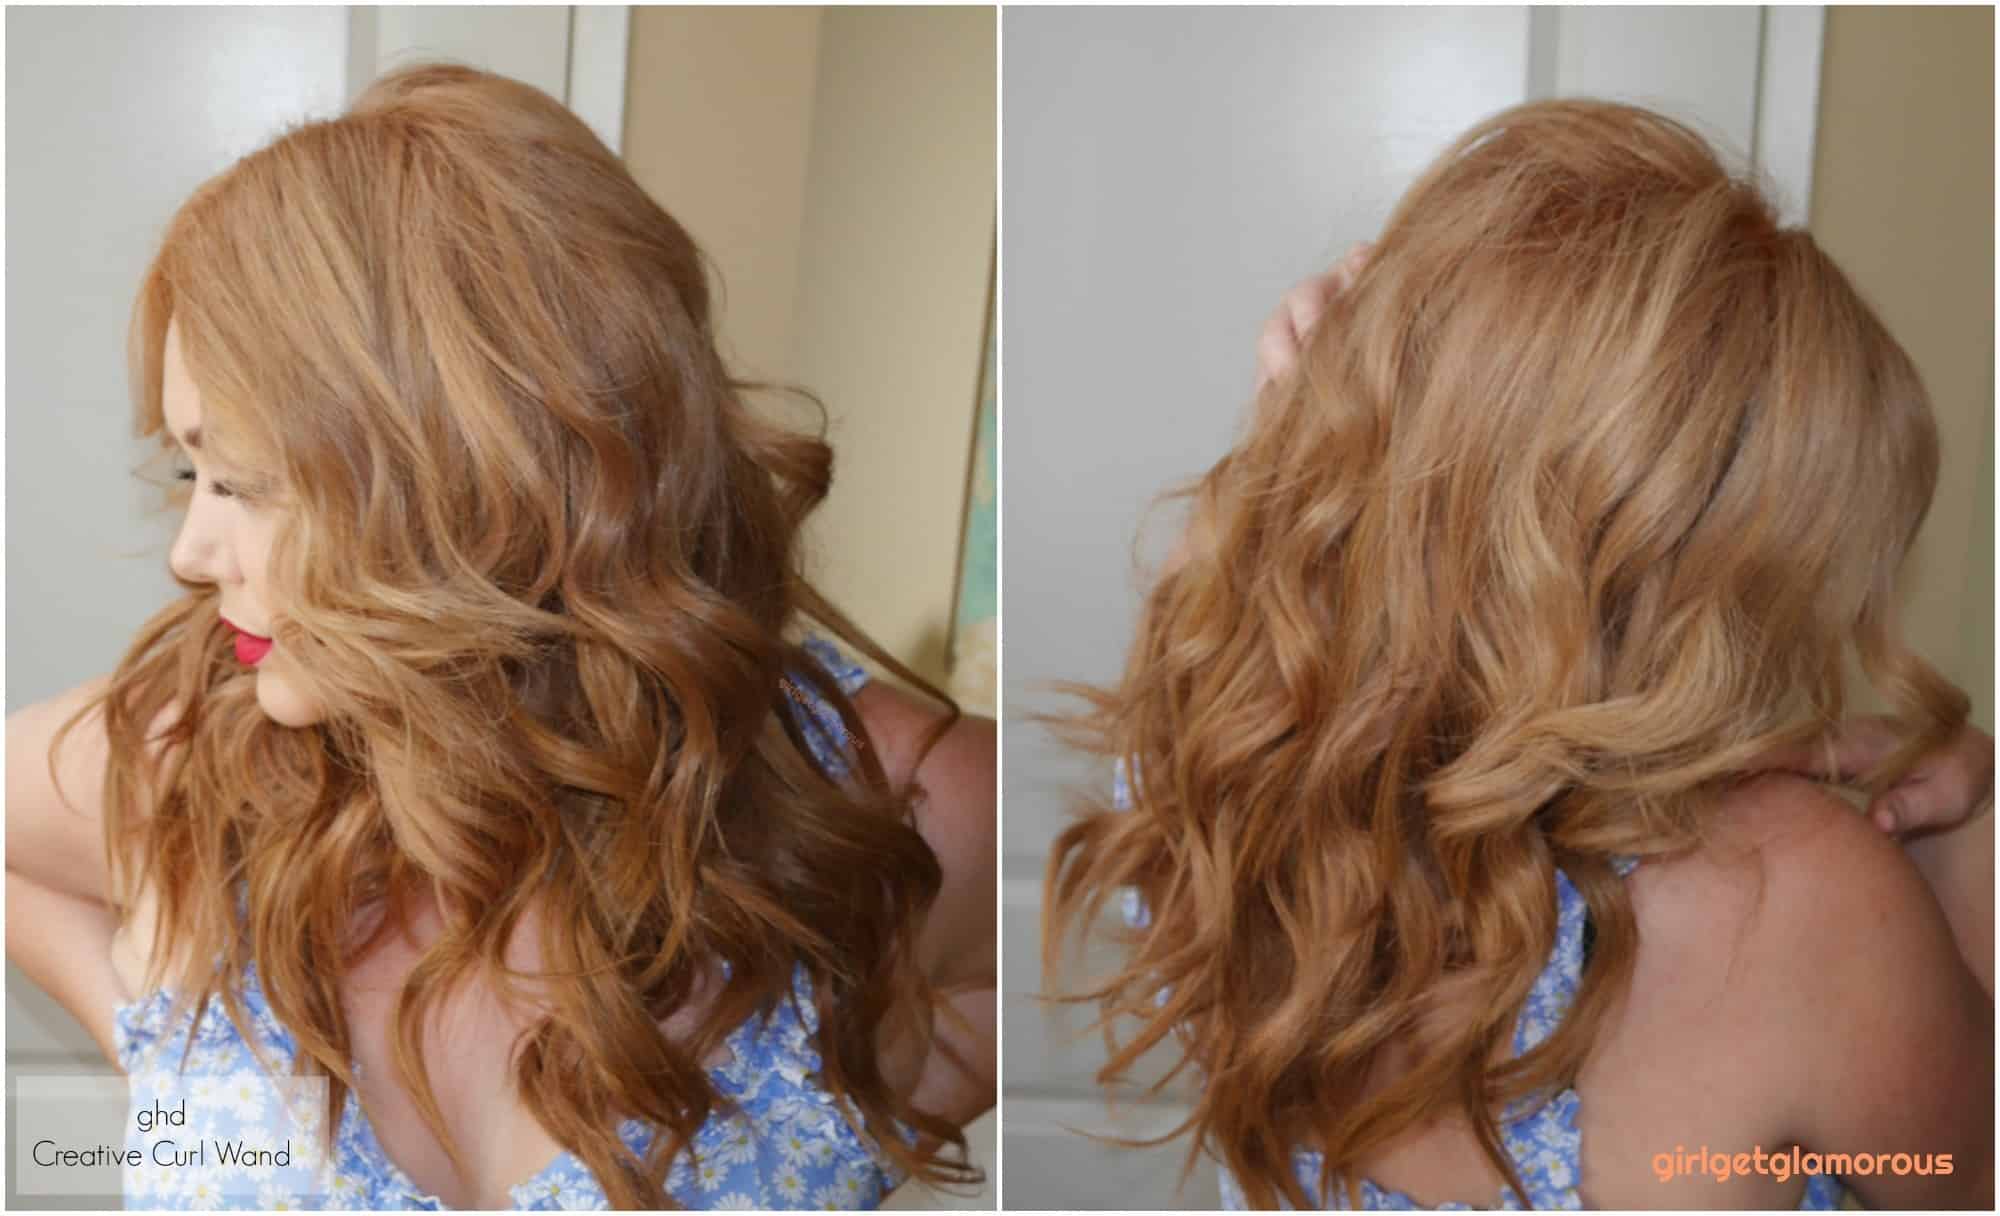 ghd creative curl results before after beach curls waves beauty blog best curler for my hair blogger